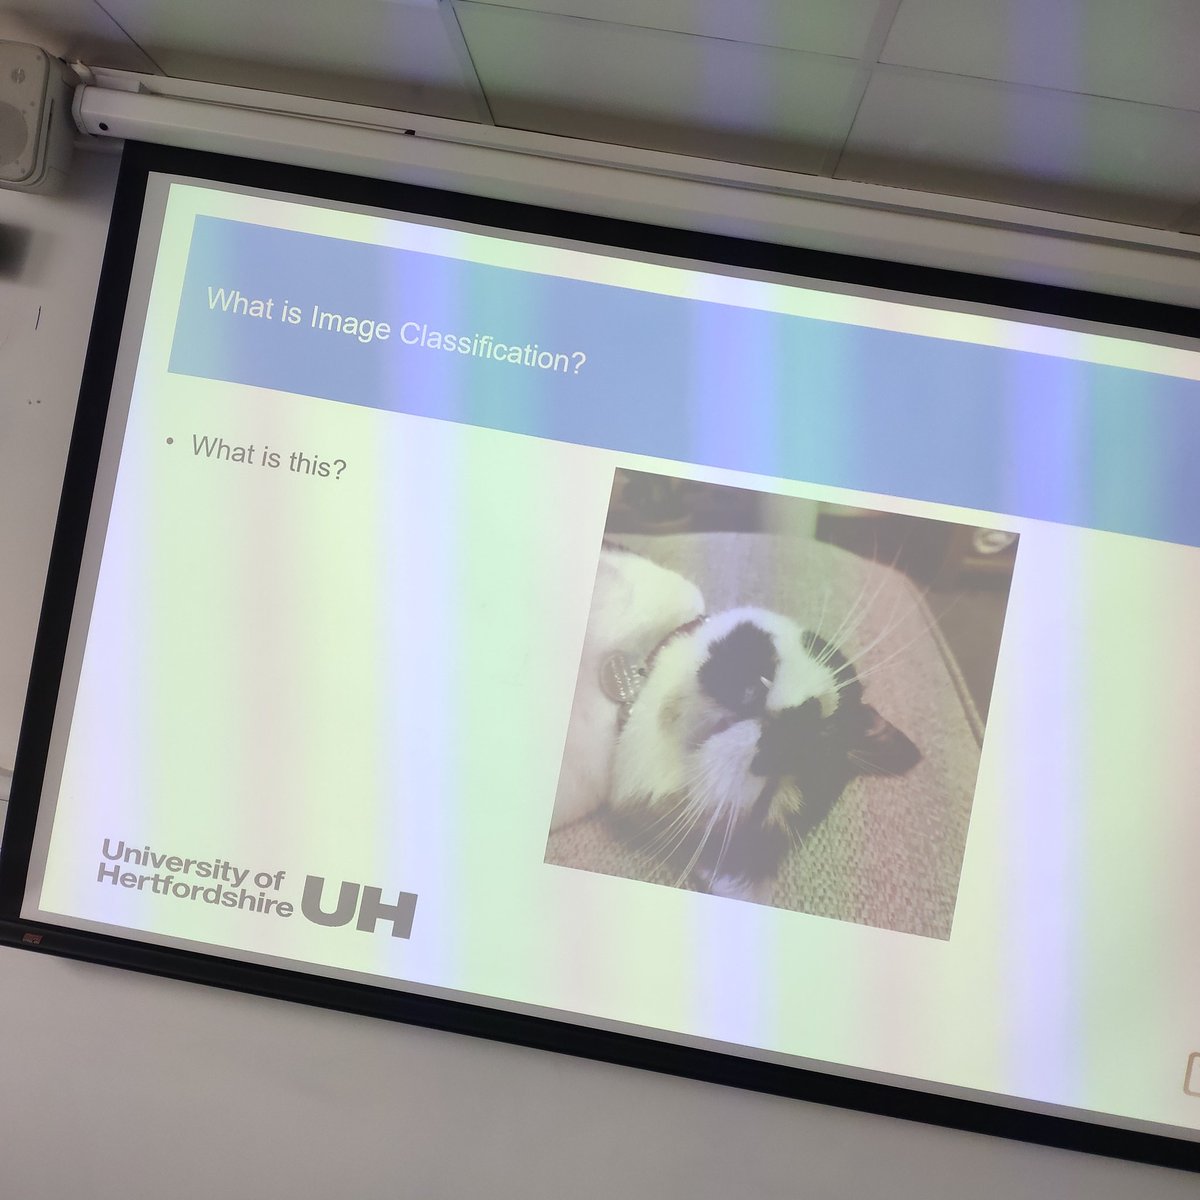 It's that time of year where my cat makes it in to a presentation!

Maybe I'll bring her in as a guest lecturer...

#remotesensing #GIS #bringyourpettowork